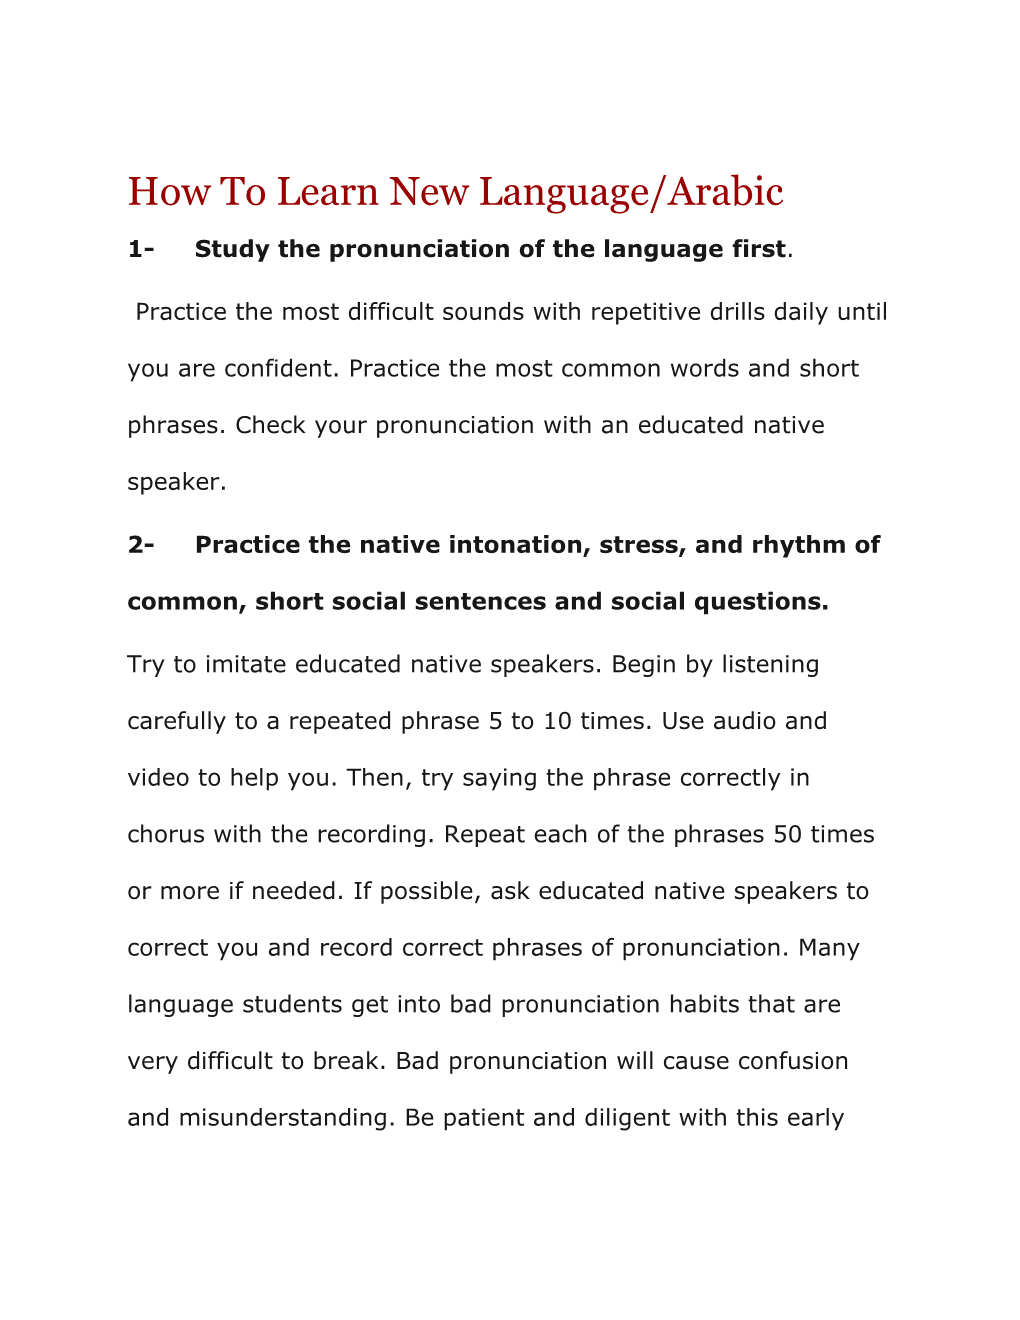 How to Learn New Language/Arabic